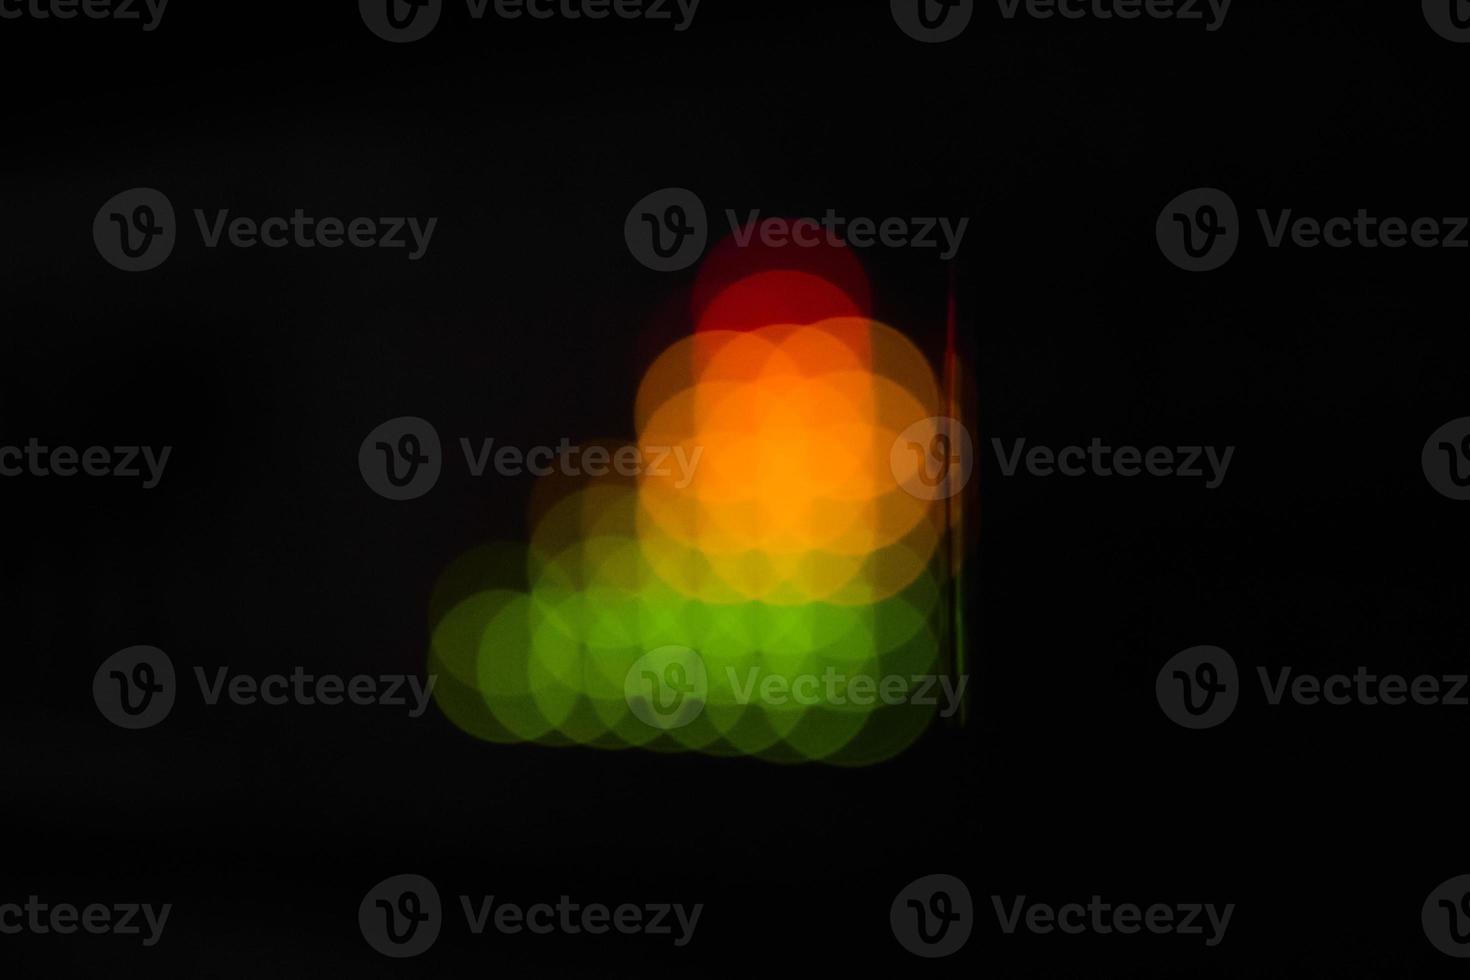 Blurred equalizer bars - abstract colorful dots photo